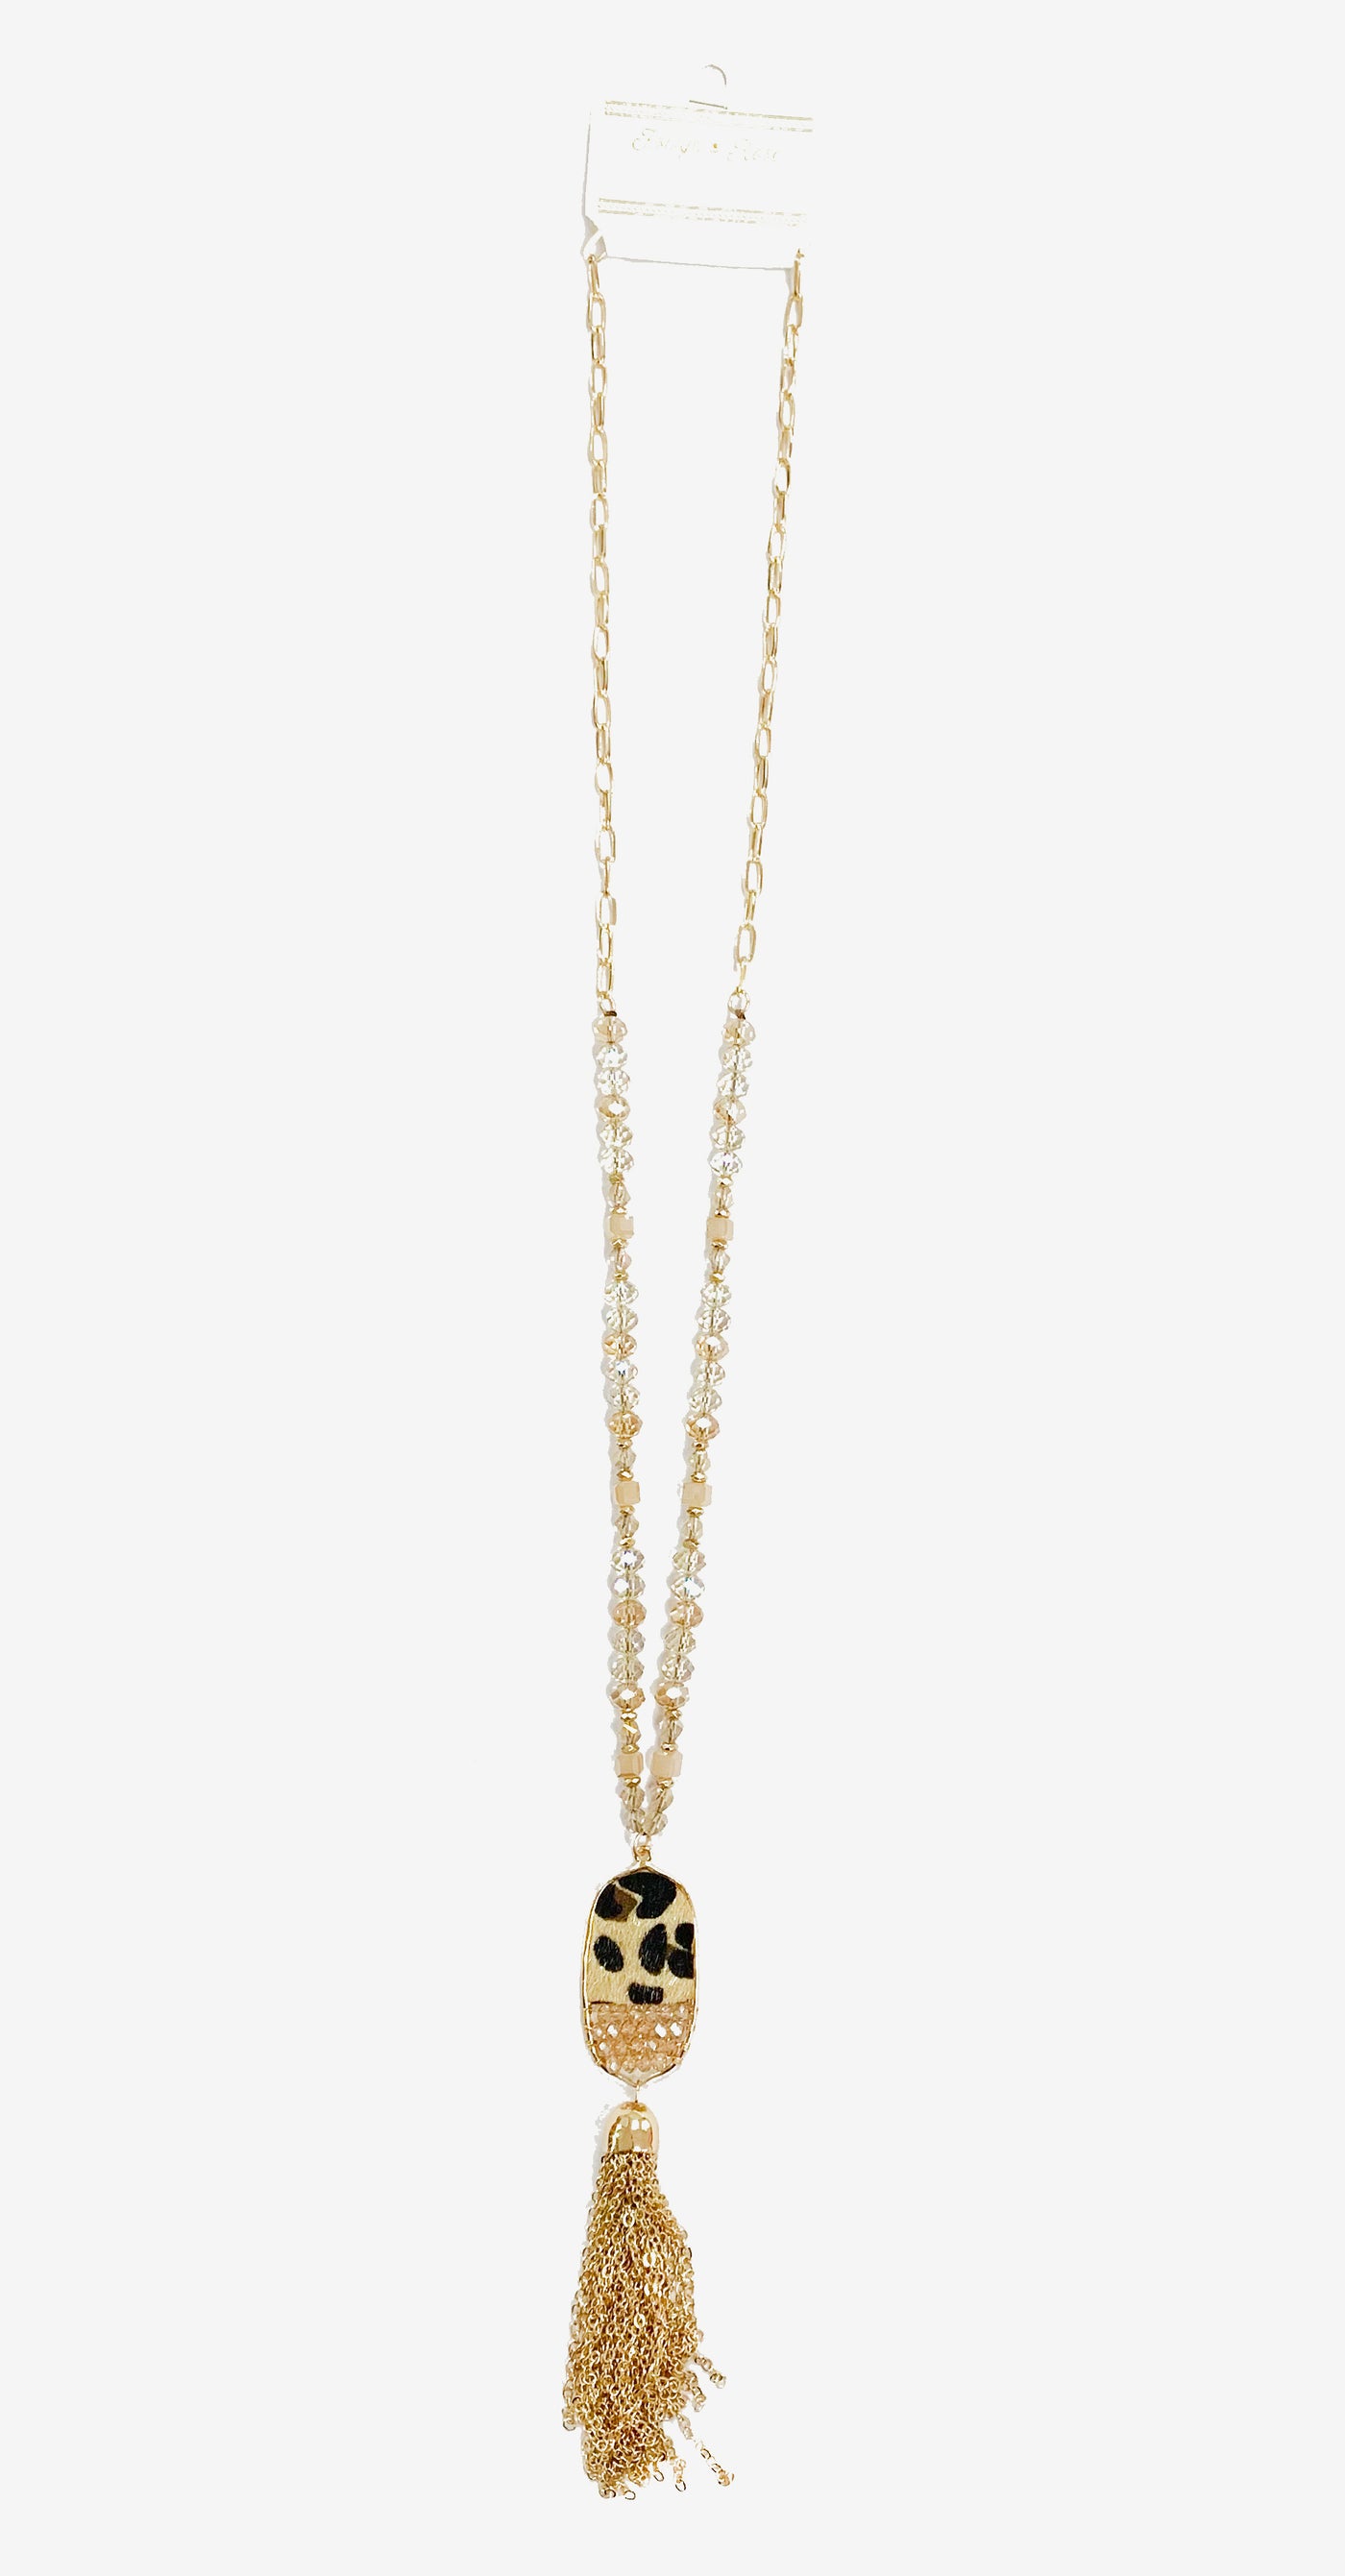 ALL THE DRAMA OVAL LEOPARD TASSEL GOLD PENDANT ON A IRIDESCENT CRYSTAL BEADED GOLD LINKED CHAIN NECKLACE